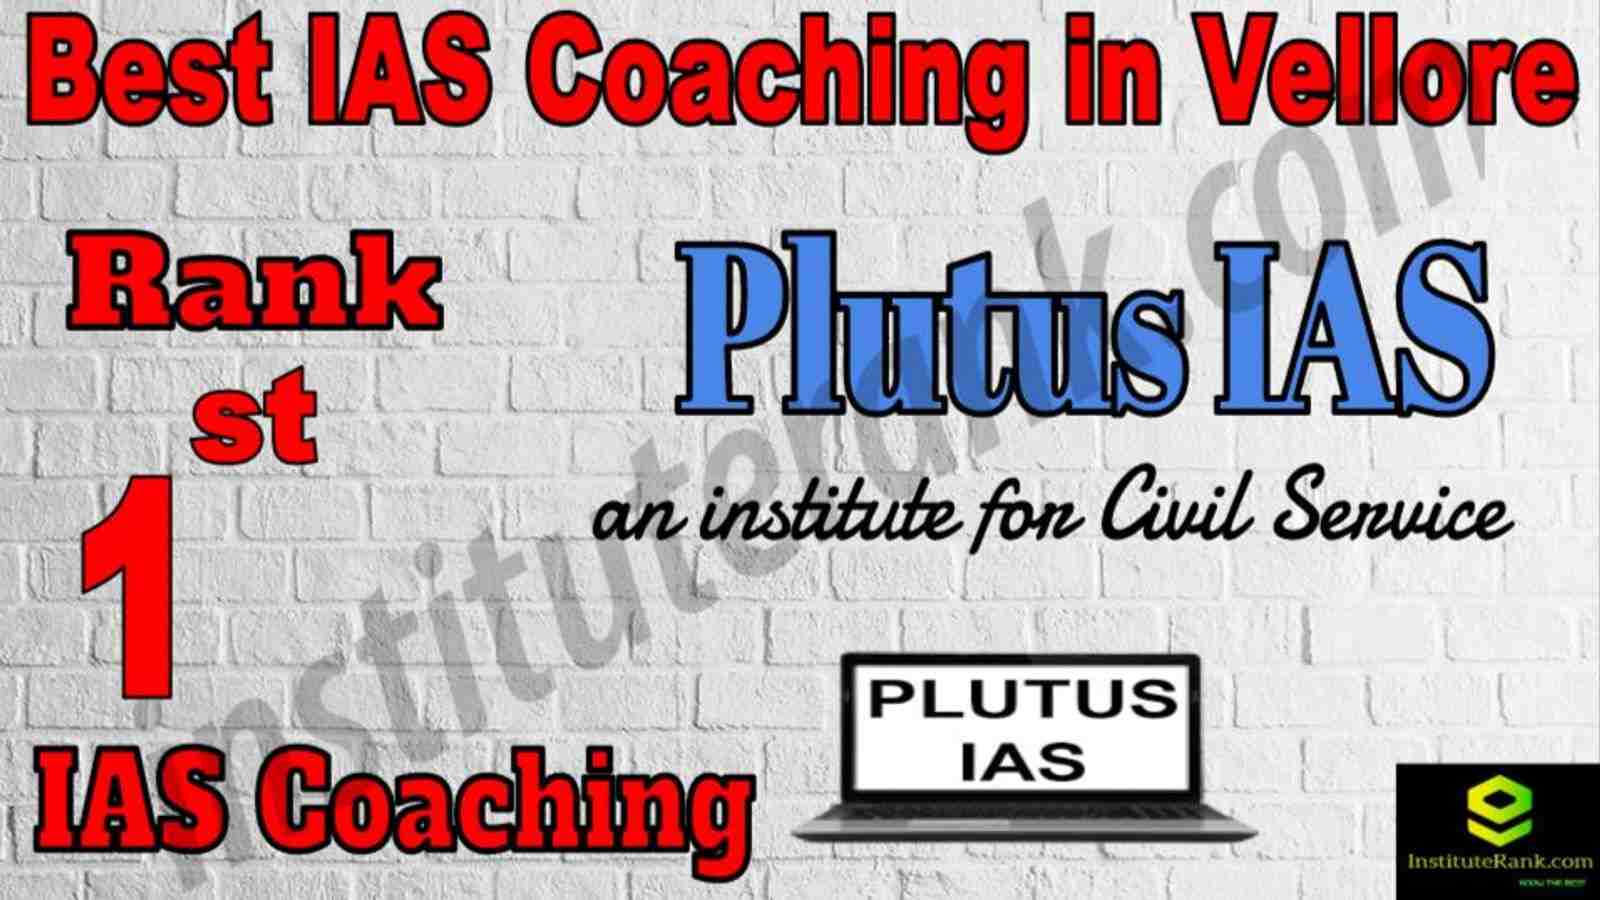 1st Best IAS Coaching in Vellore